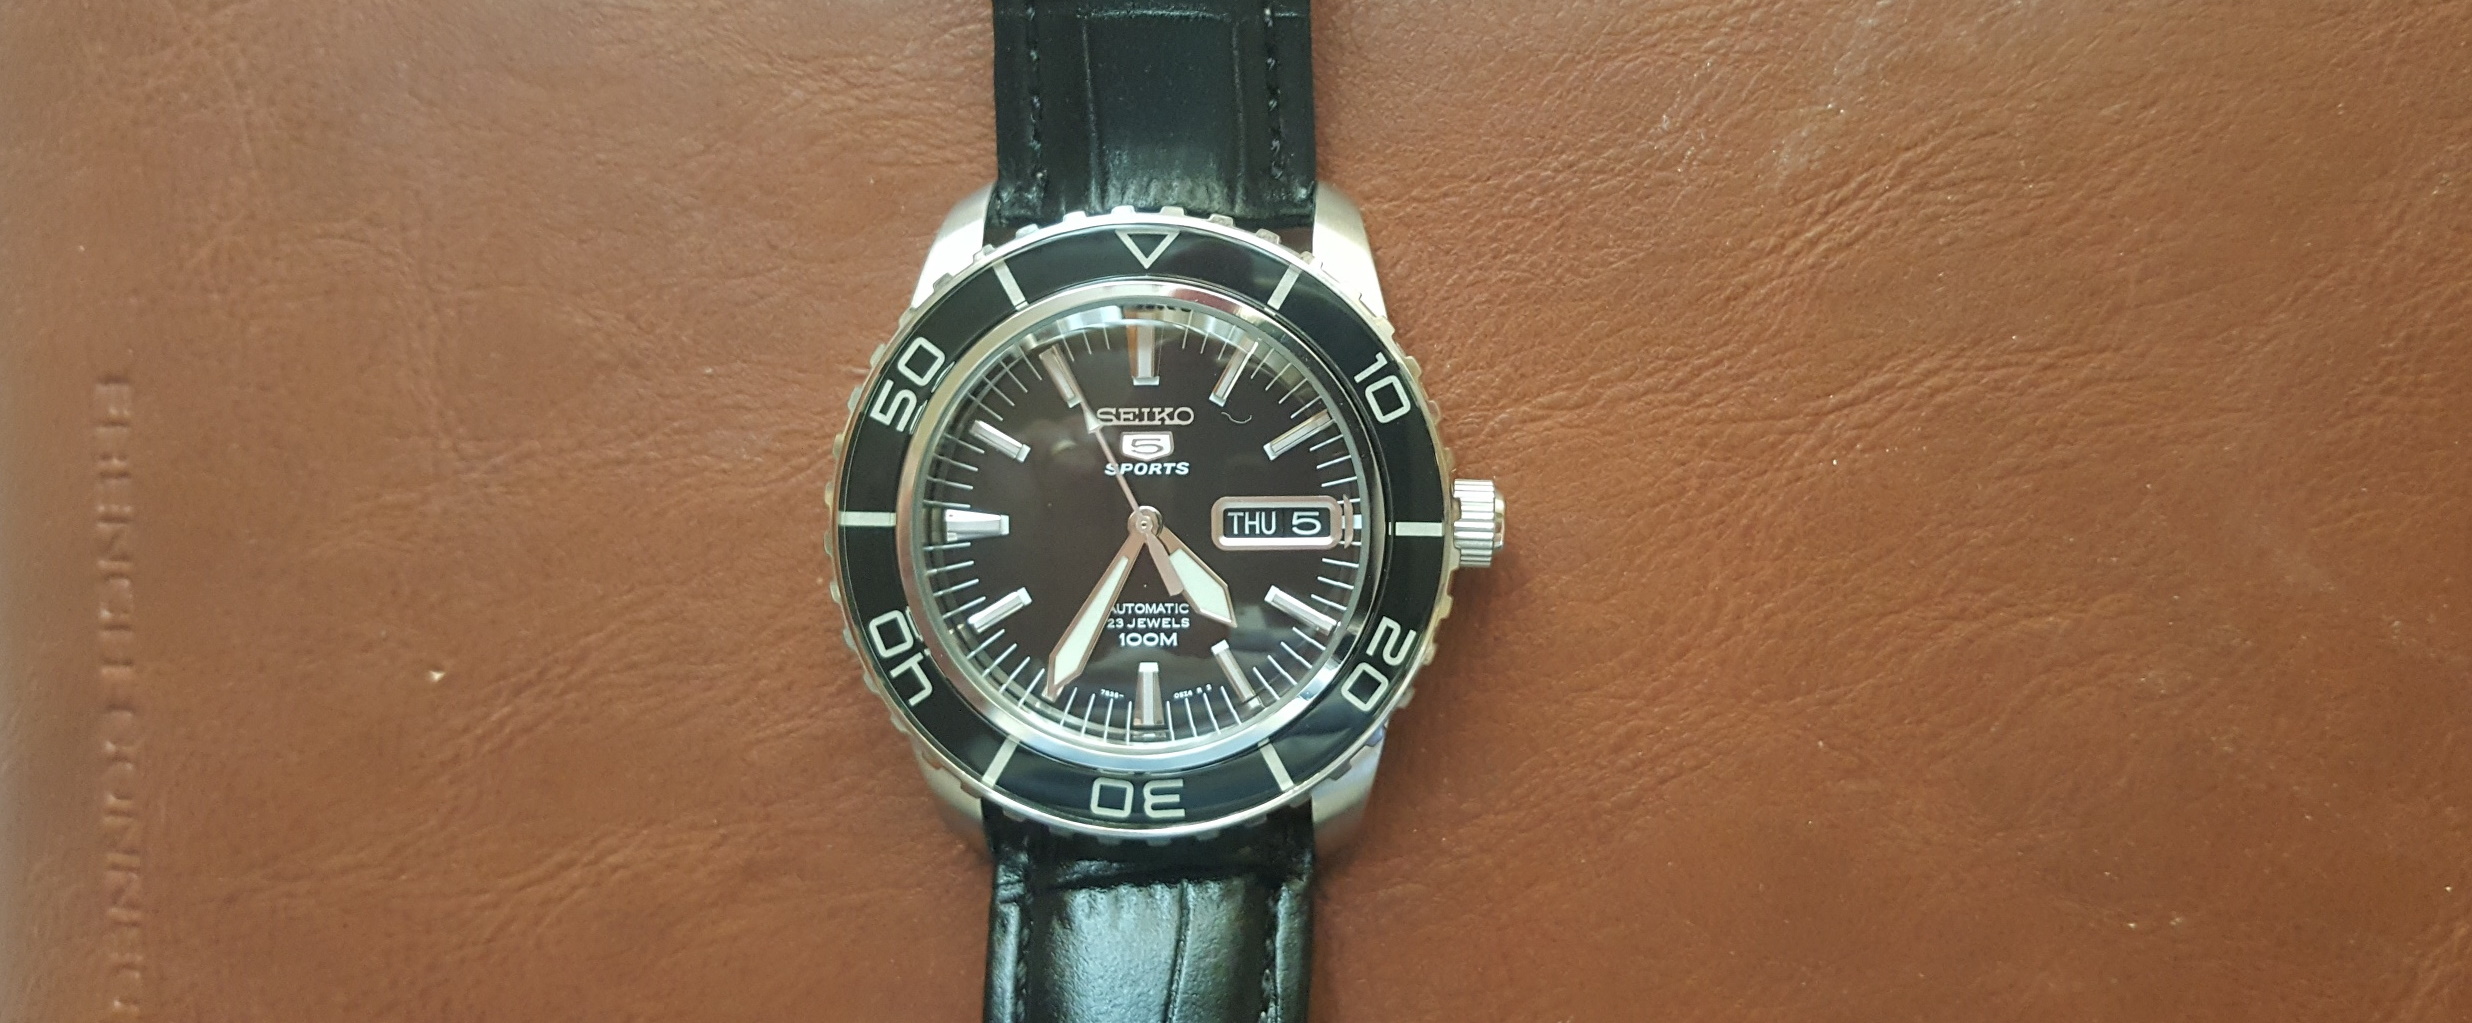 I Can't Mod This Watch! - Seiko SNZH55 